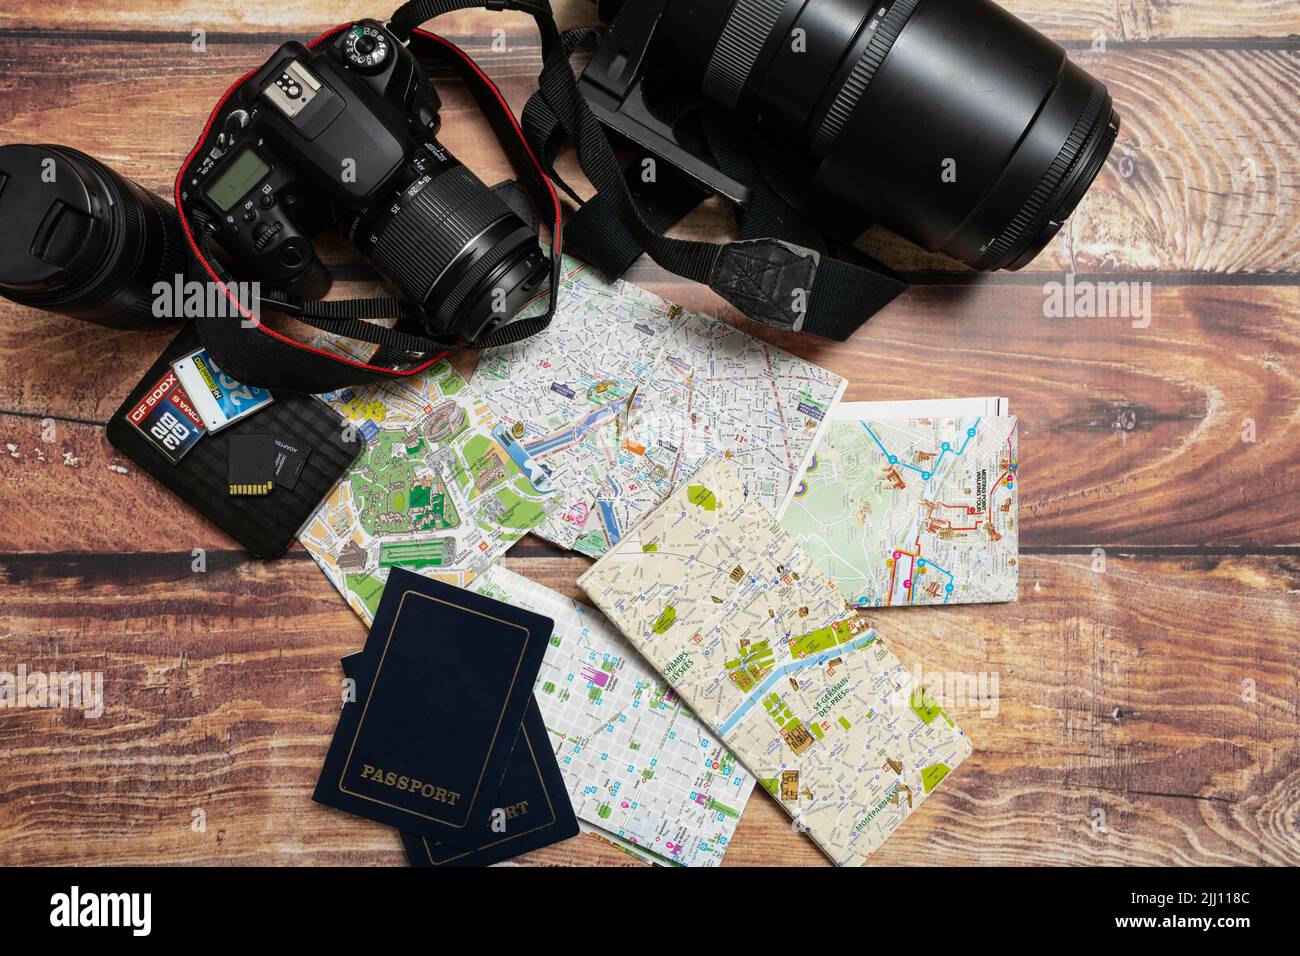 A City maps next to cameras and passport on a wooden table. Concept of vacations, travels, travelers, Copy space. Stock Photo